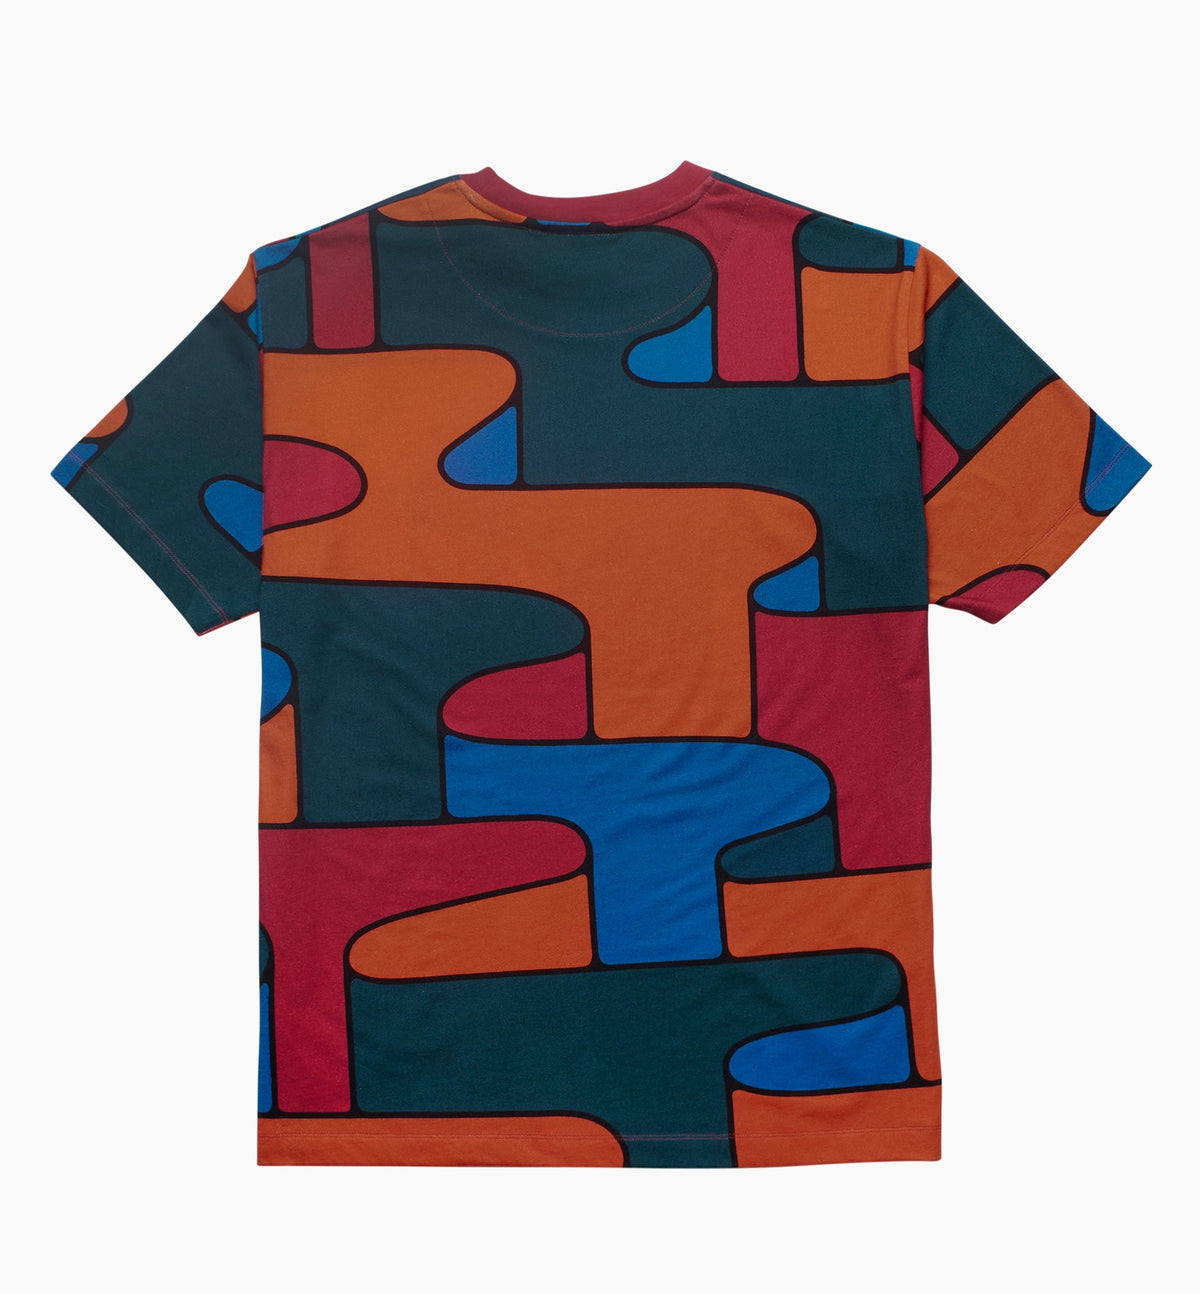 BY PARRA CANYONS ALL OVER TEE